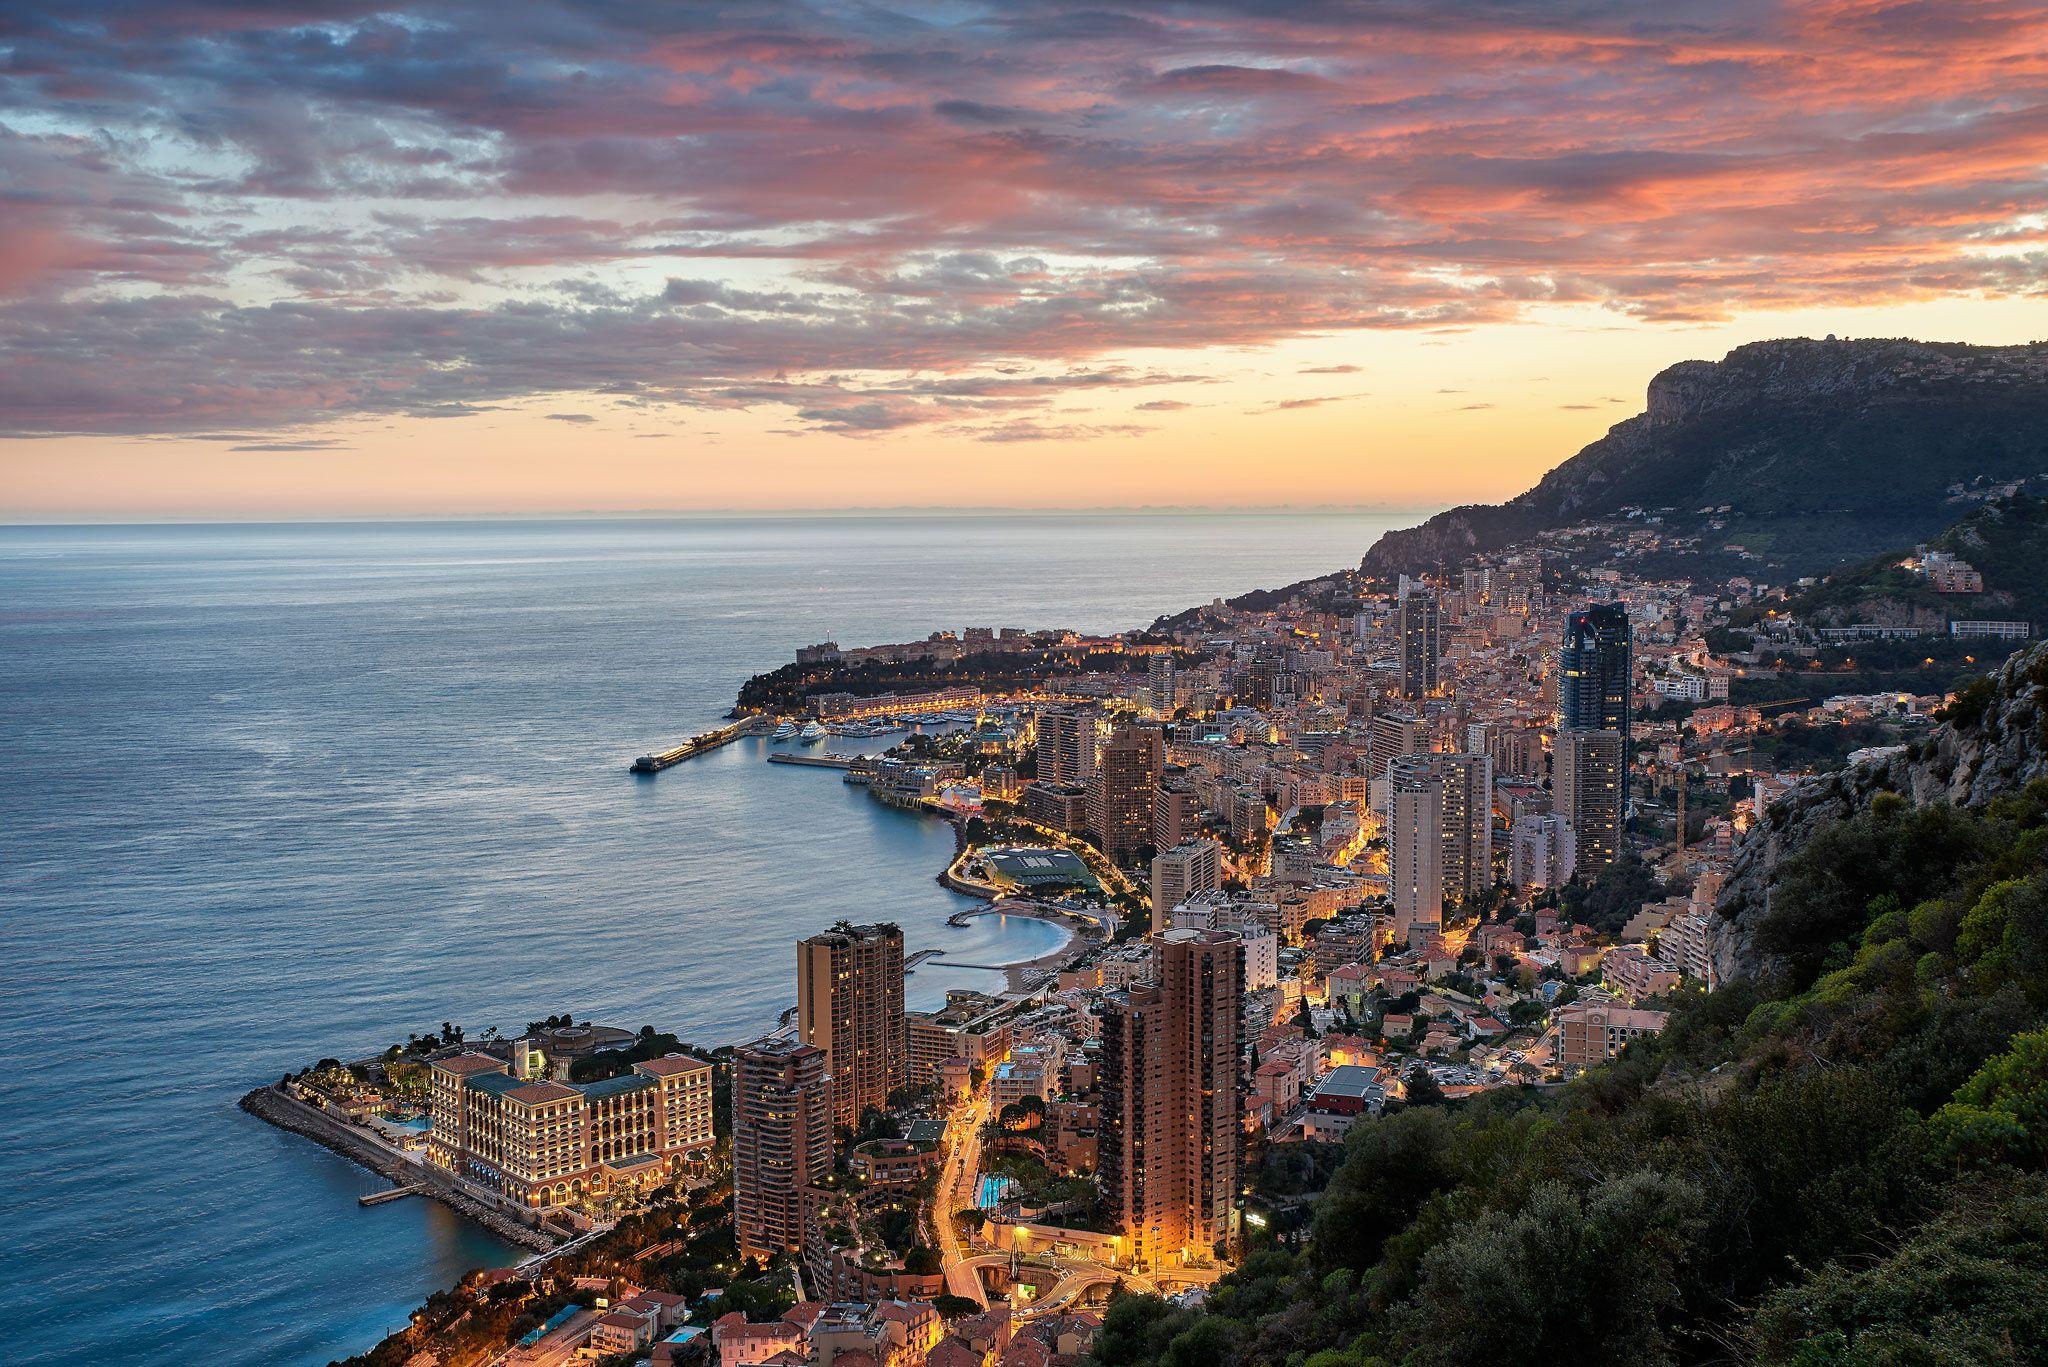 Monte Carlo at Sunset nice sunset over Monte Carlo. Sky